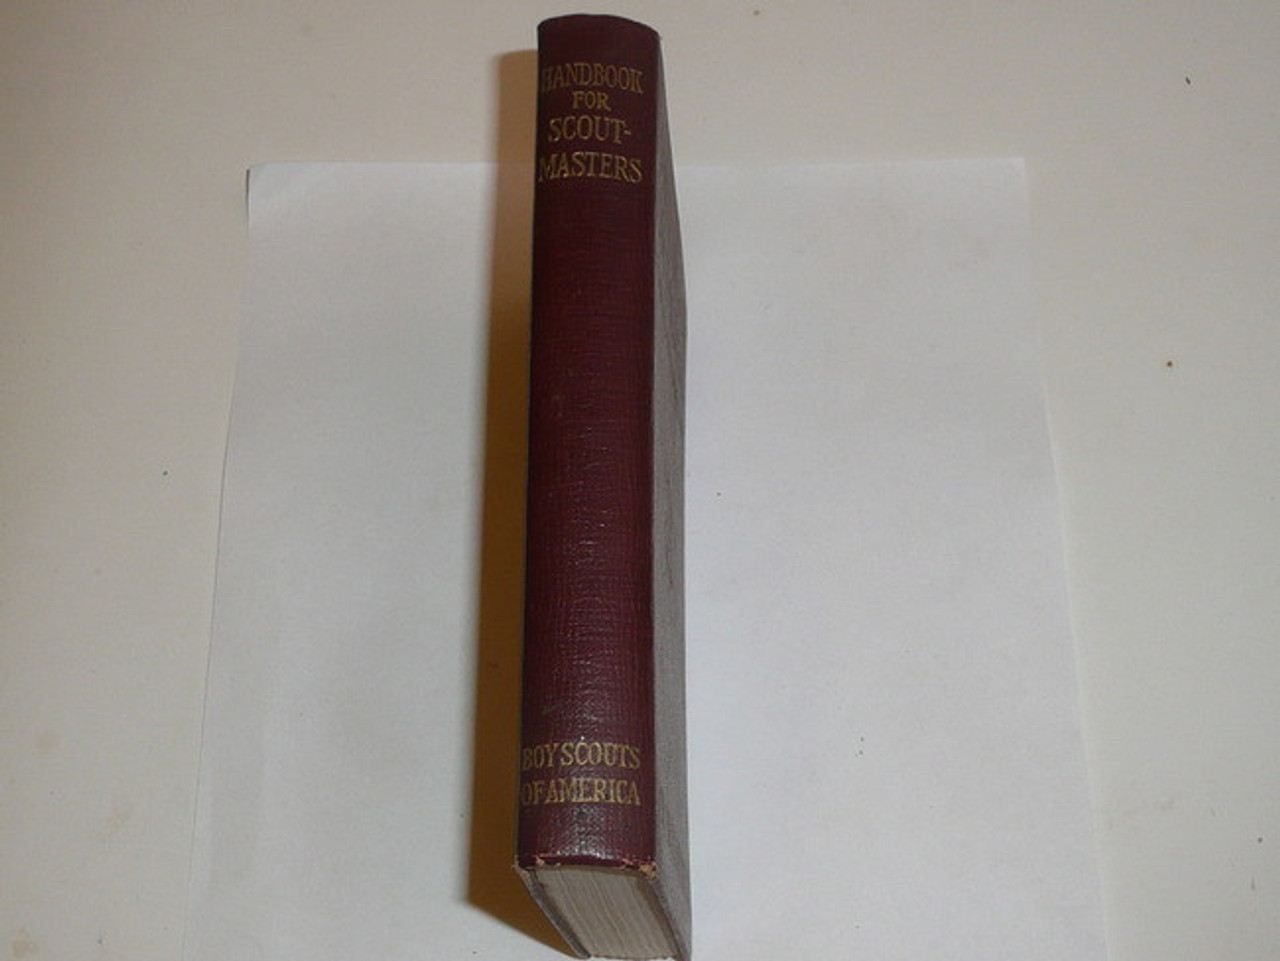 1934 Handbook For Scoutmasters, Second Edition, Seventeenth Printing, near MINT Condition, Maroon color cover